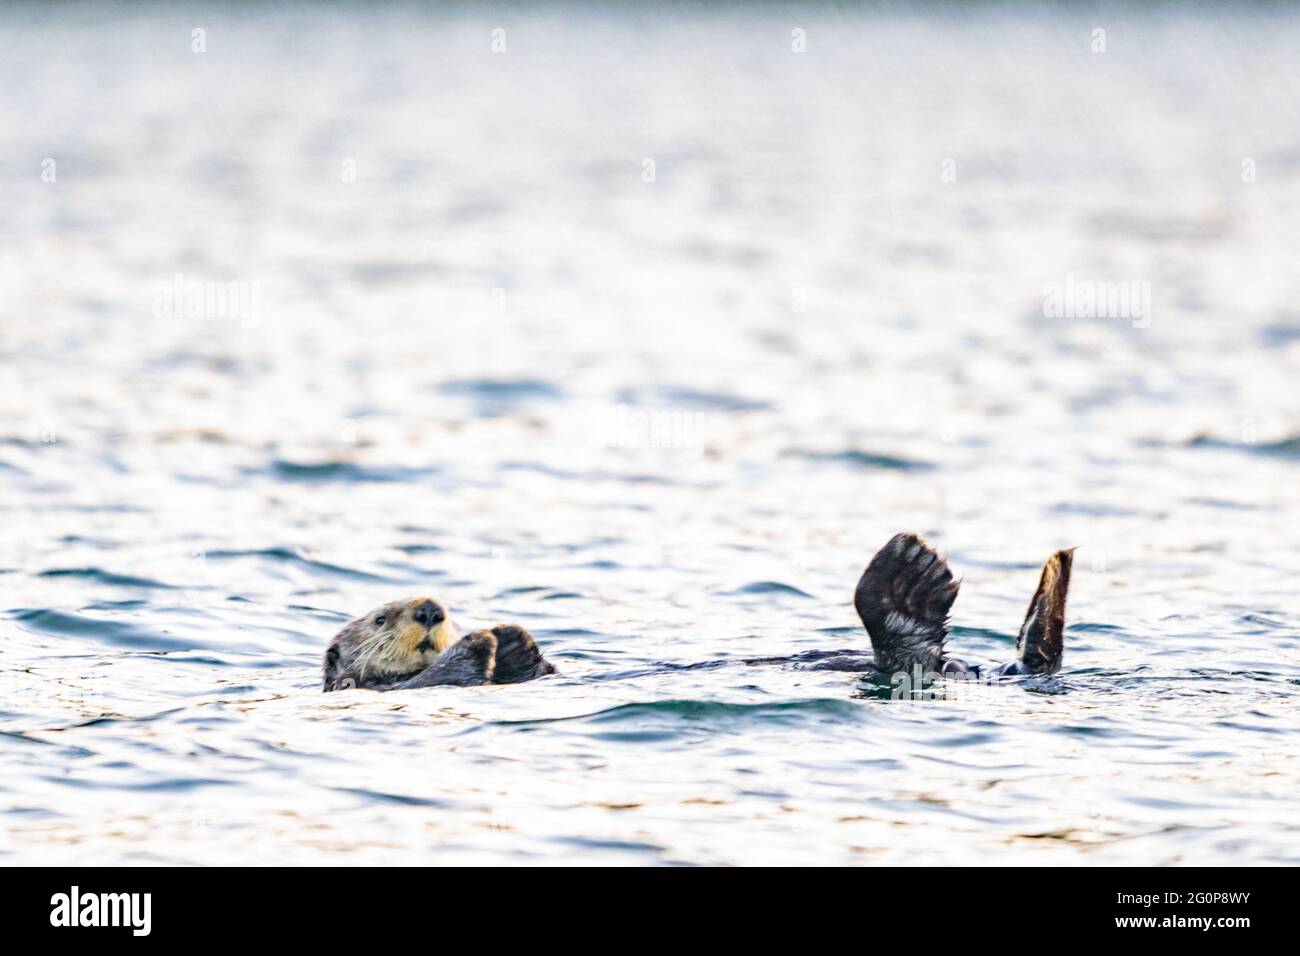 Sea otter sticking their feet out of the water to warm up. Stock Photo